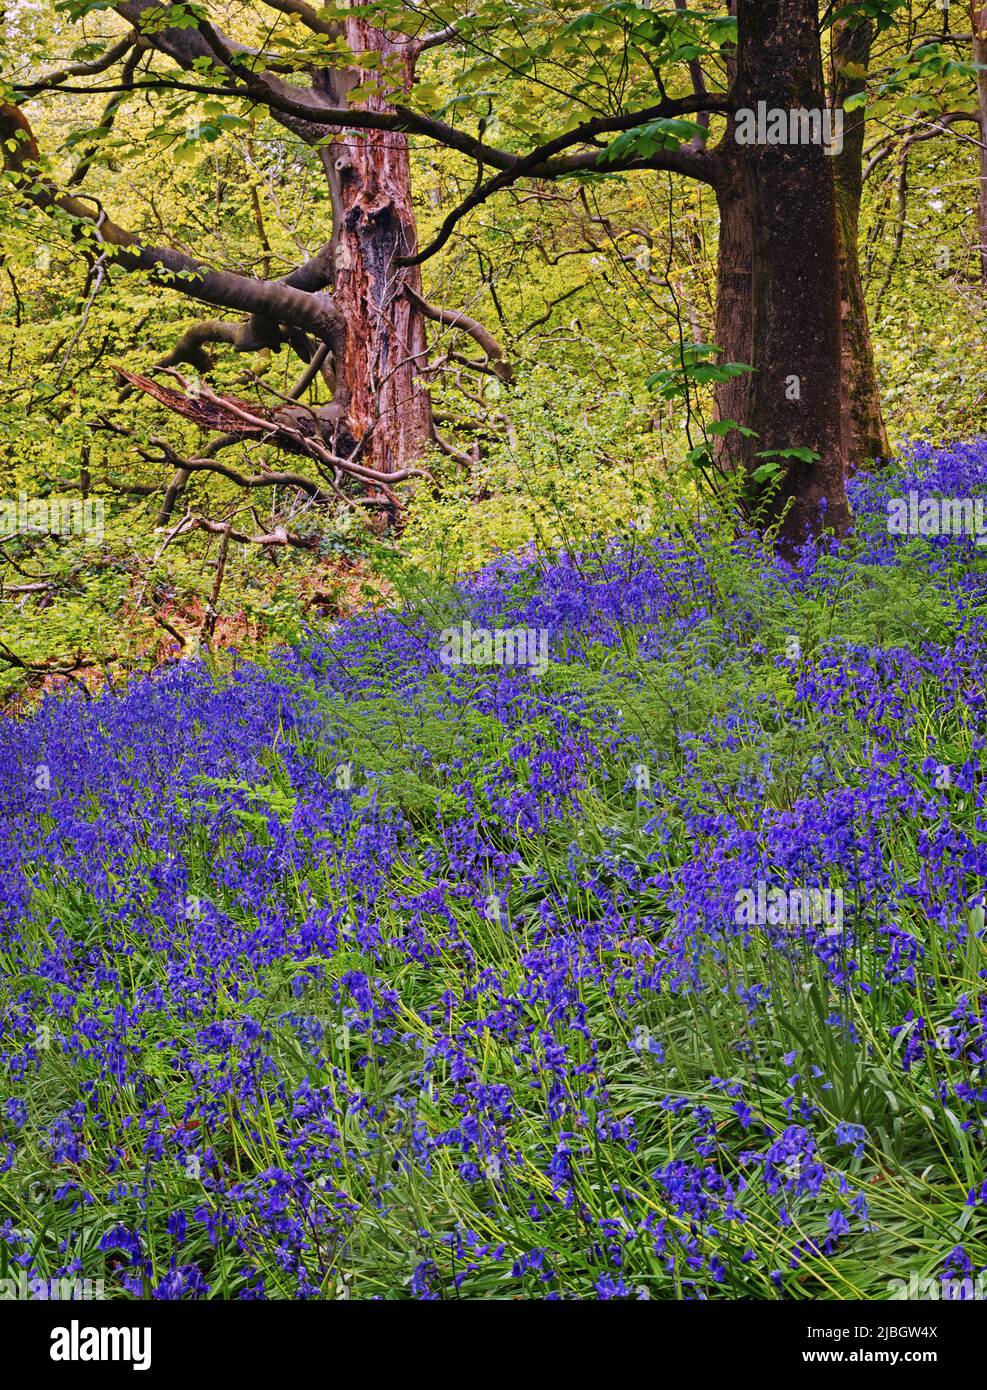 Bluebells on a bank, with a dominant back-lit tree in the background, in portrait format. Stock Photo